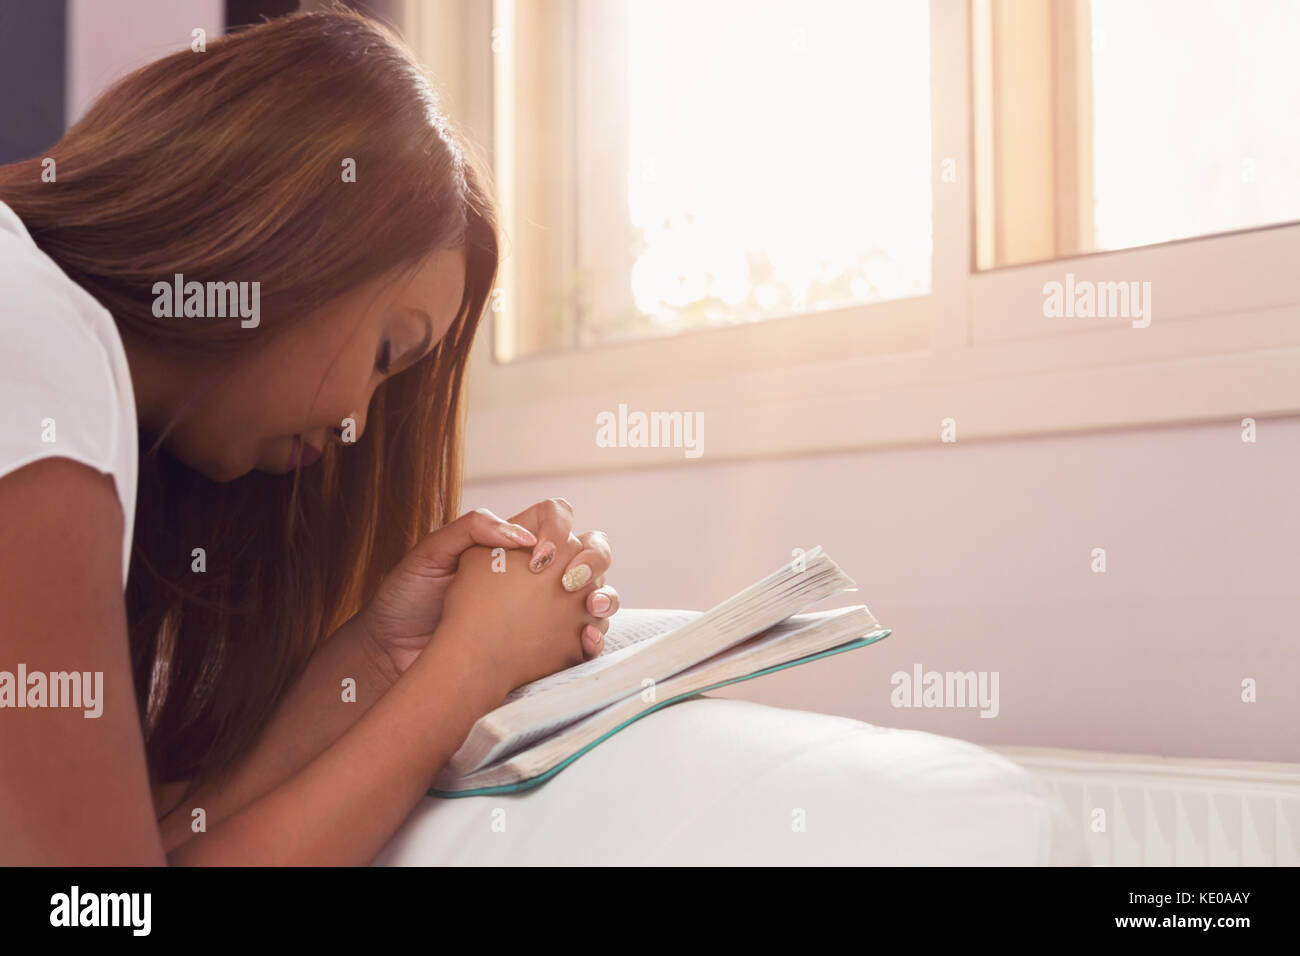 Girl Praying With her Hands Folded On The Bible Stock Photo